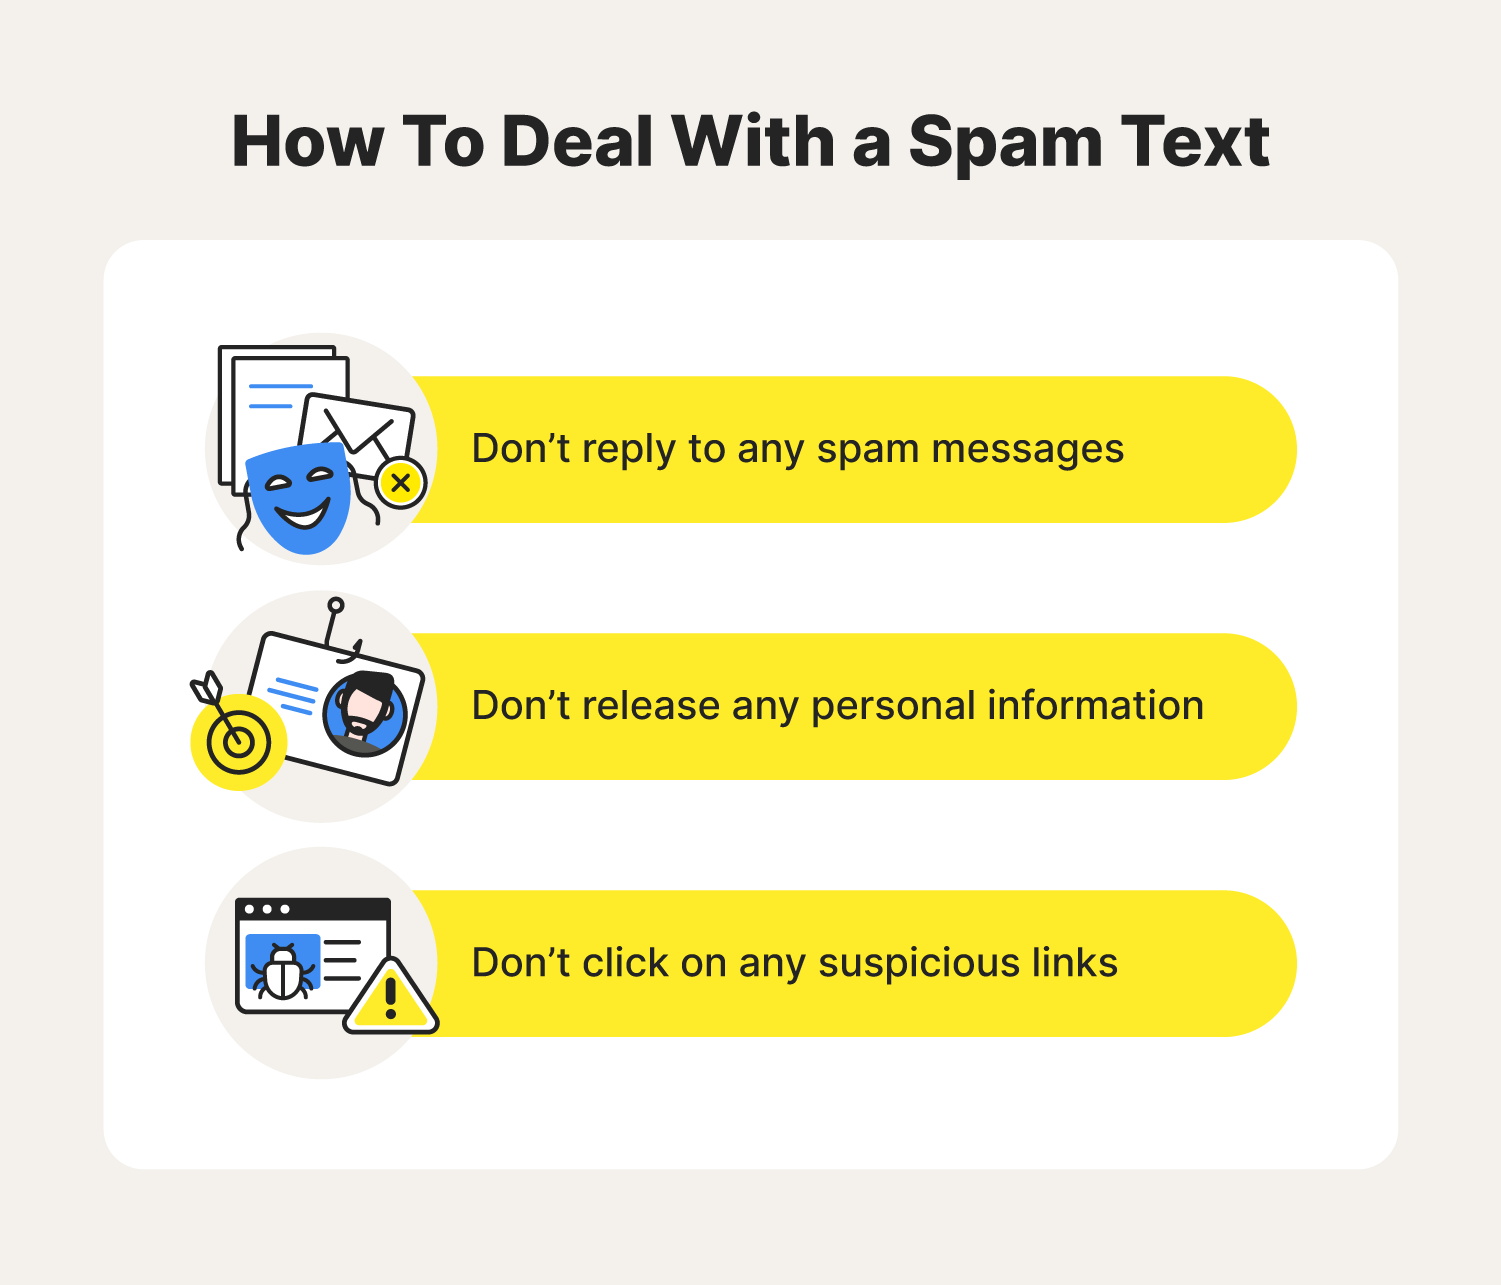 A graphic lists three tips that teach you how to stop spam texts.